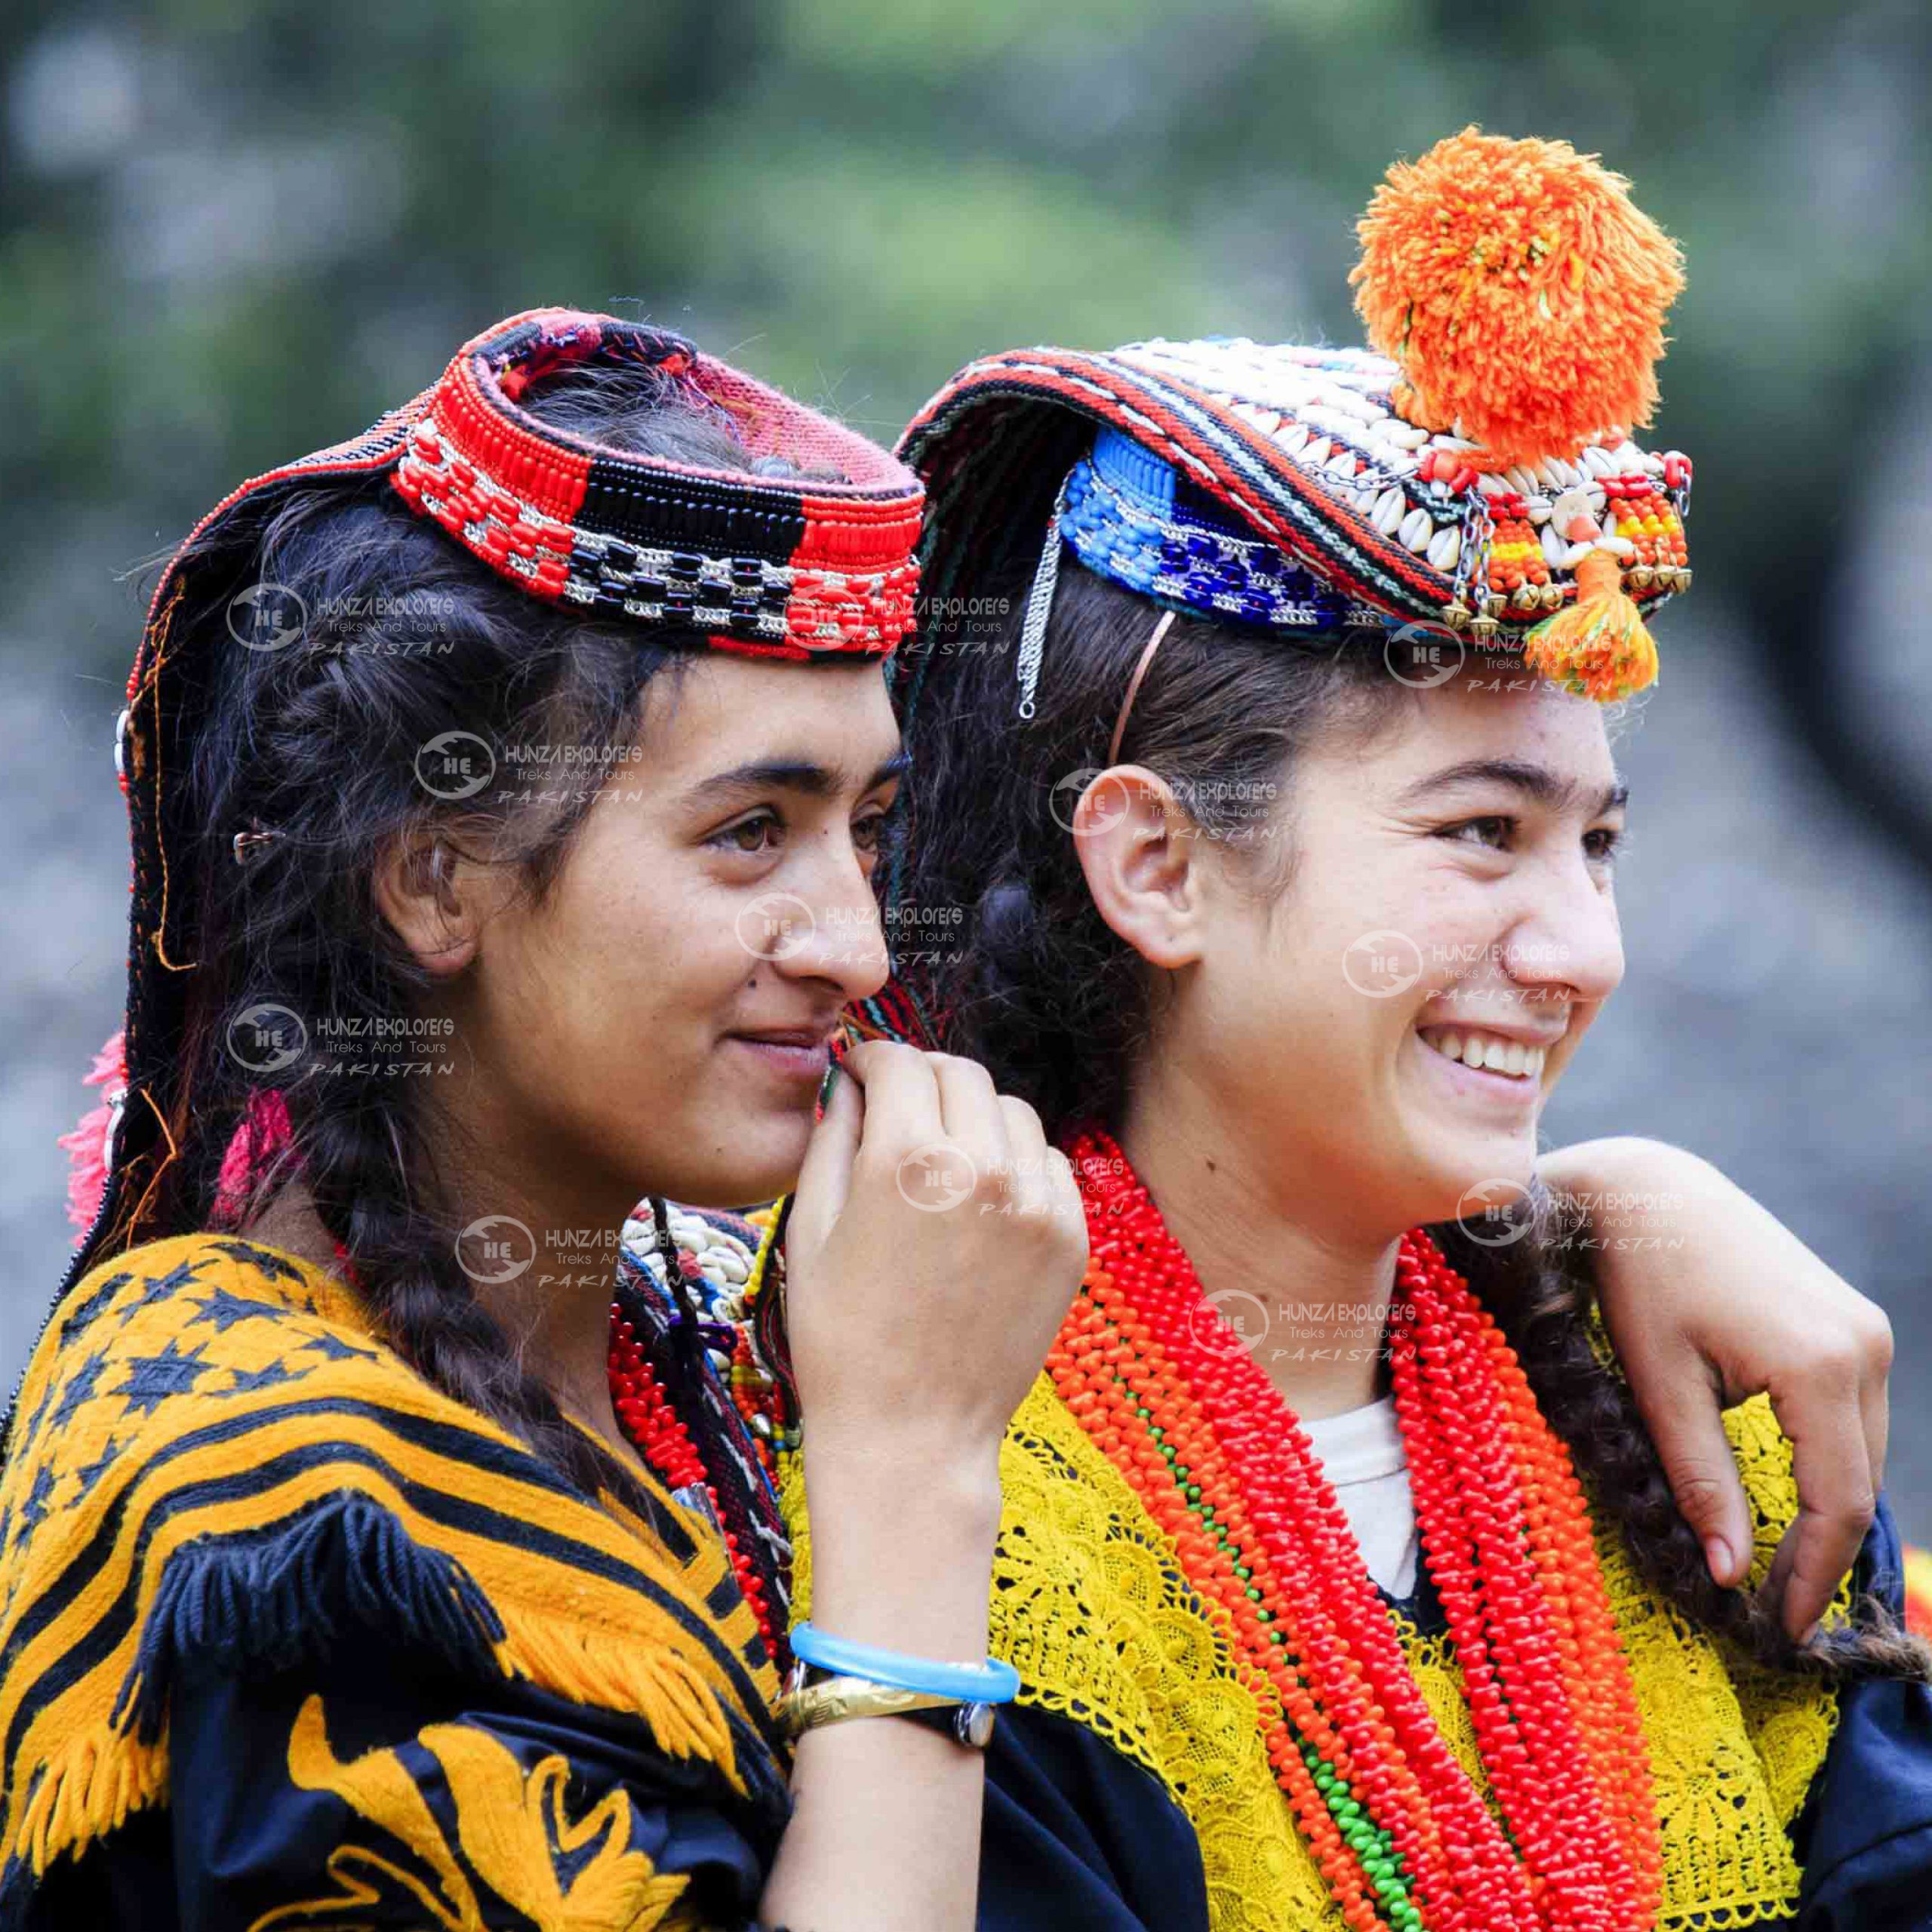 Day 07: Kalash Valley - Continued Cultural Exploration